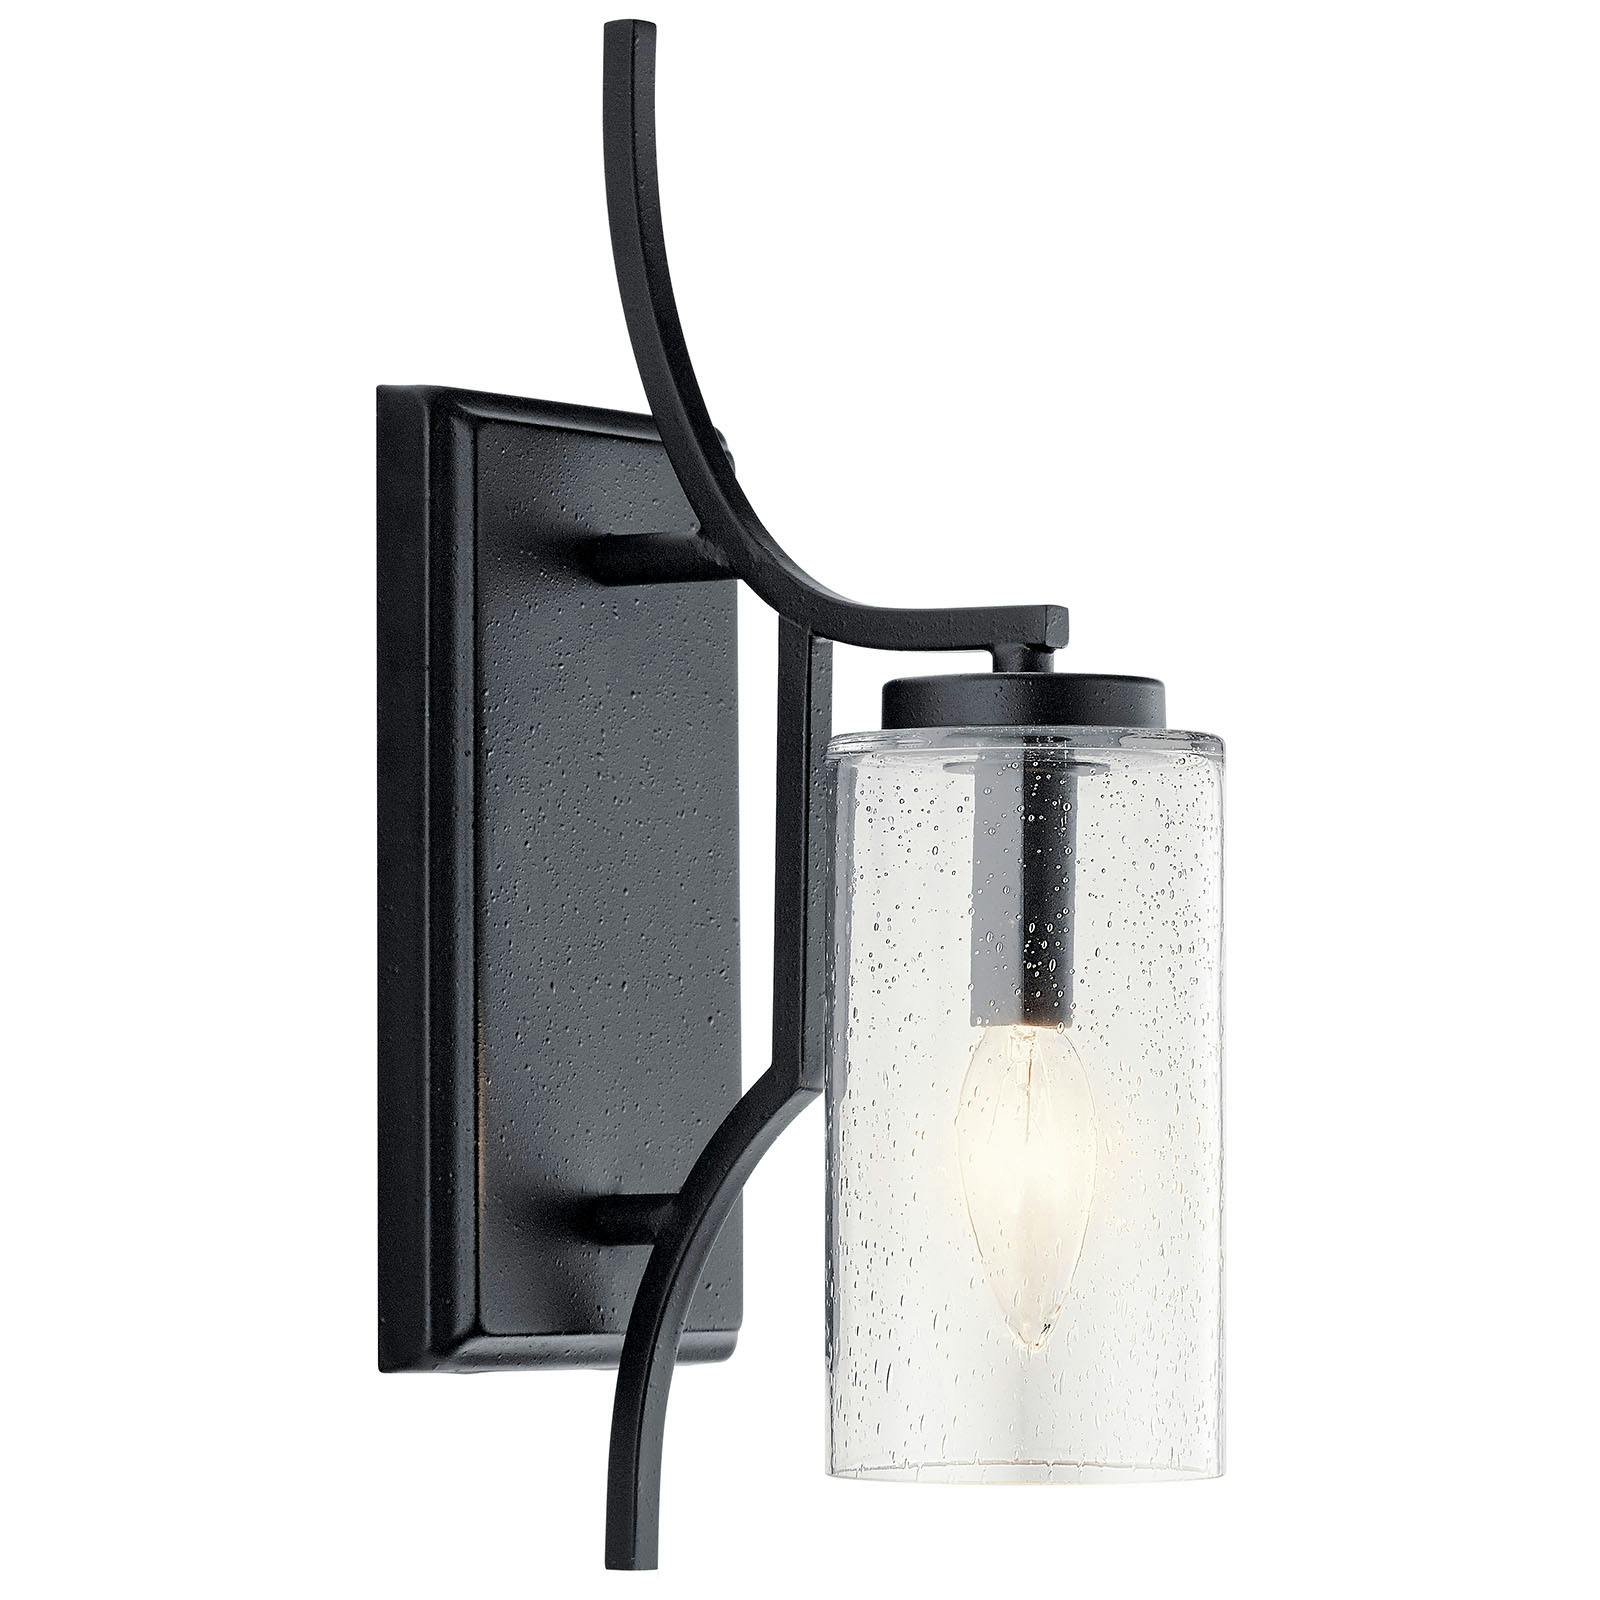 The Vara 1 Light Wall Sconce Distressed Black facing down on a white background